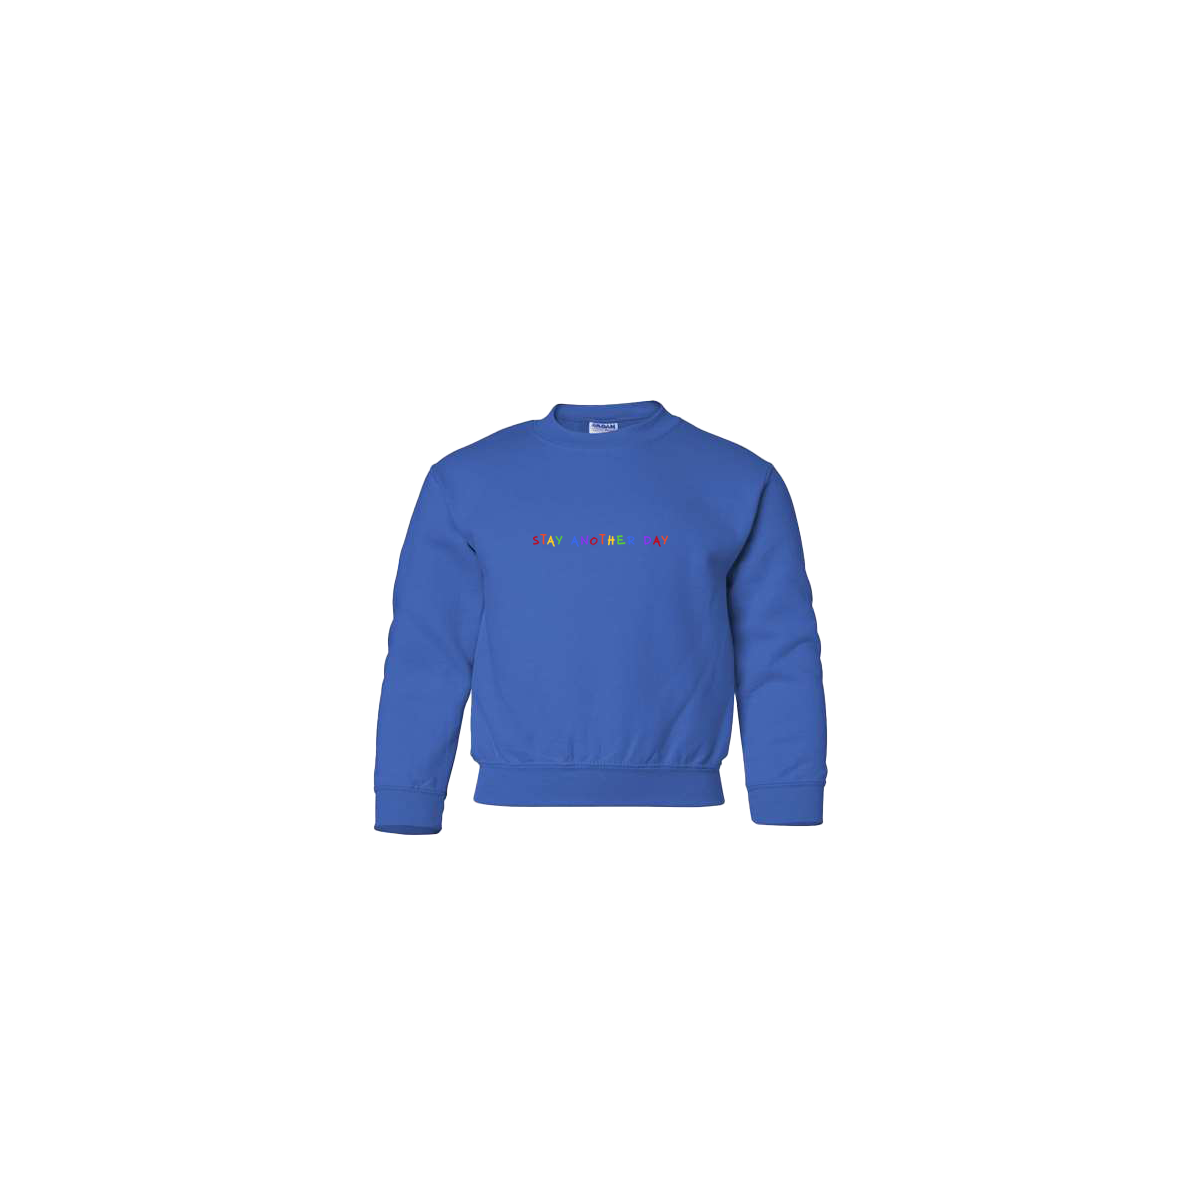 Stay Another Day Rainbow Embroidered Royal Blue Youth Crewneck